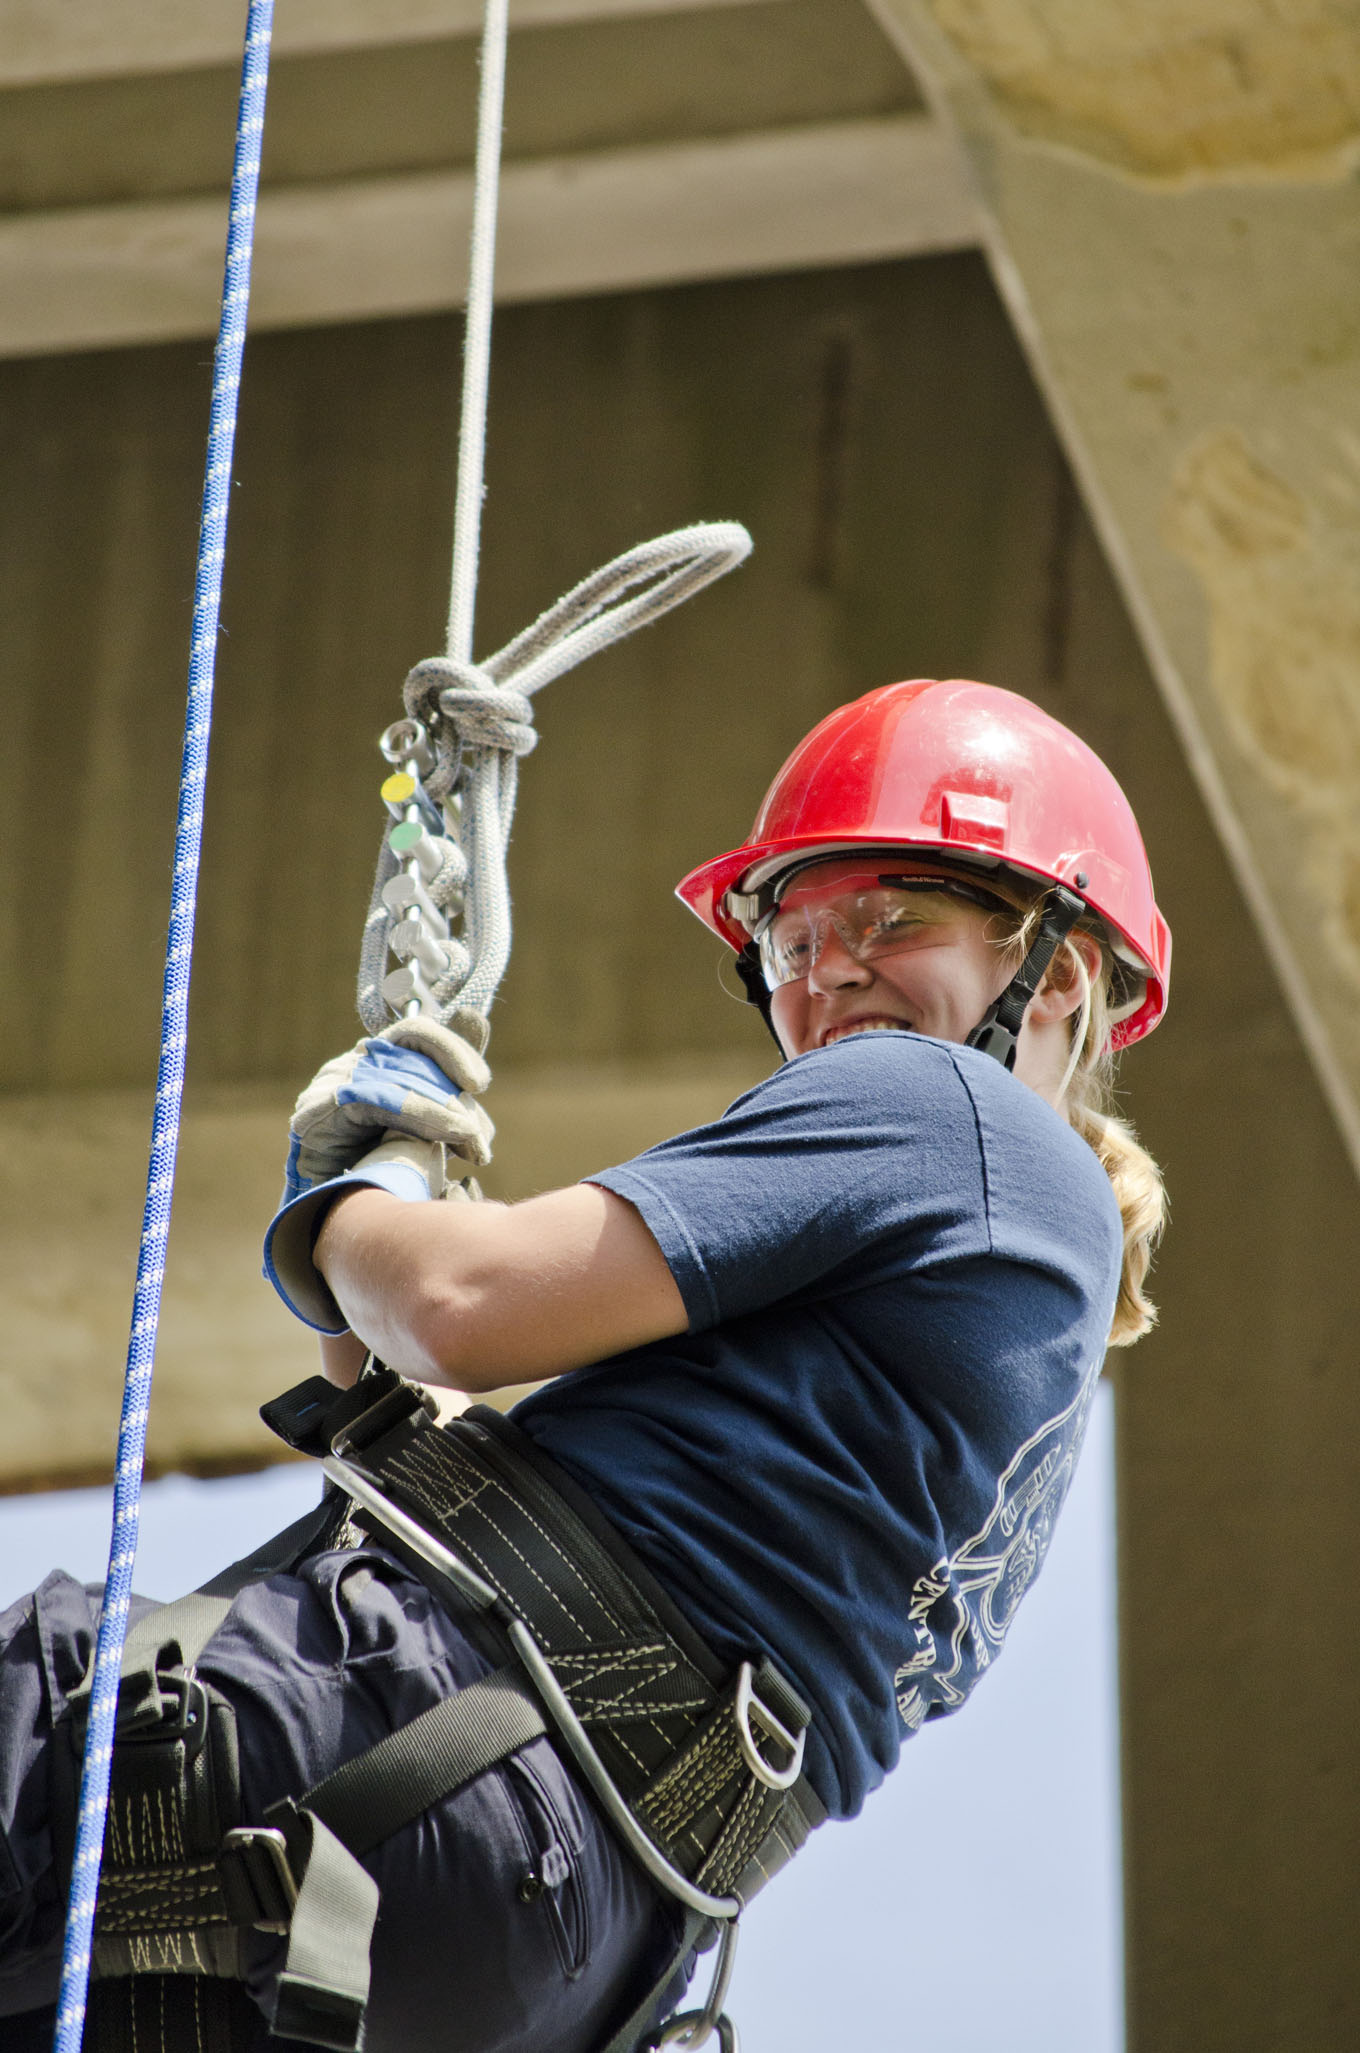 Rope Rescue – Operations - 4 Day Class